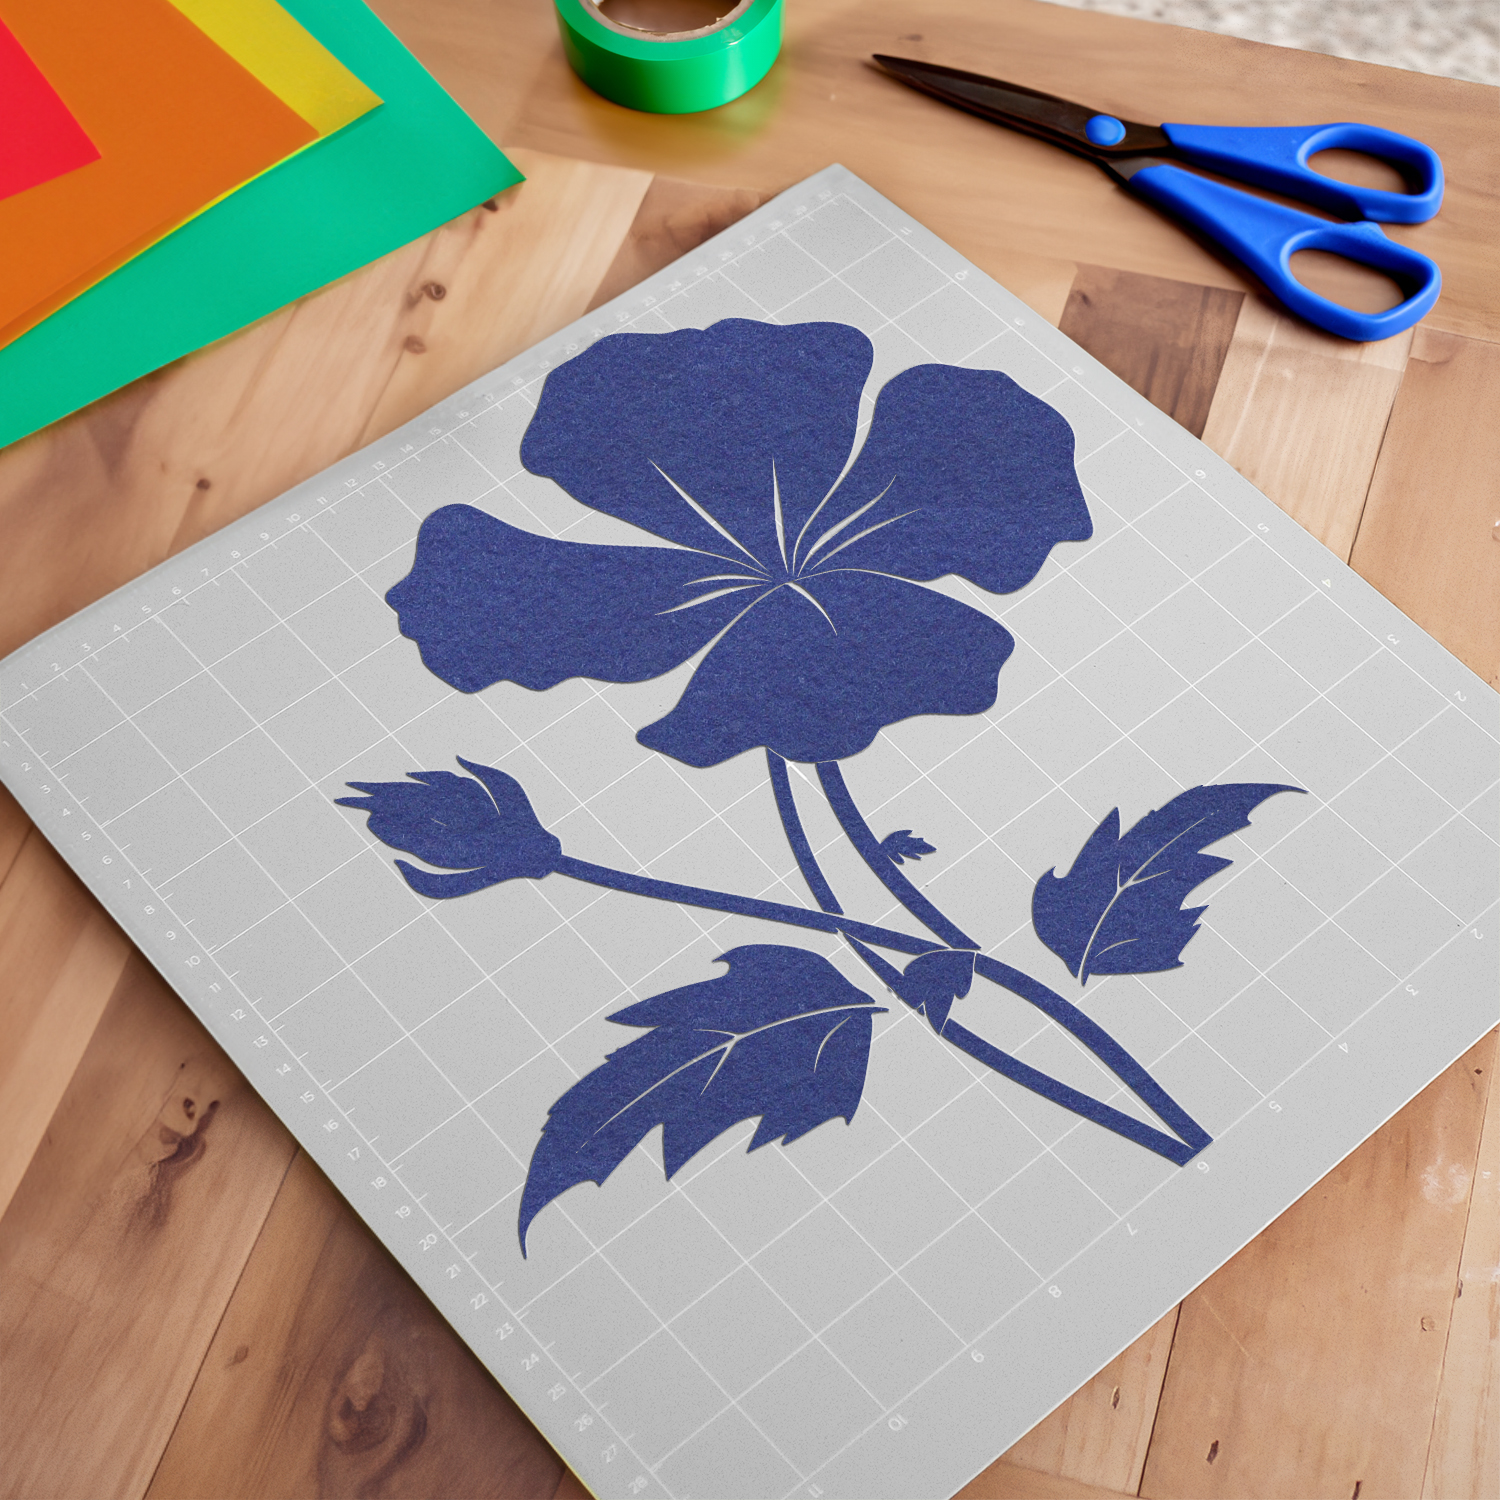 Instant Download Petunia with Leaves Image SVG, PNG, DXF - Cricut ...